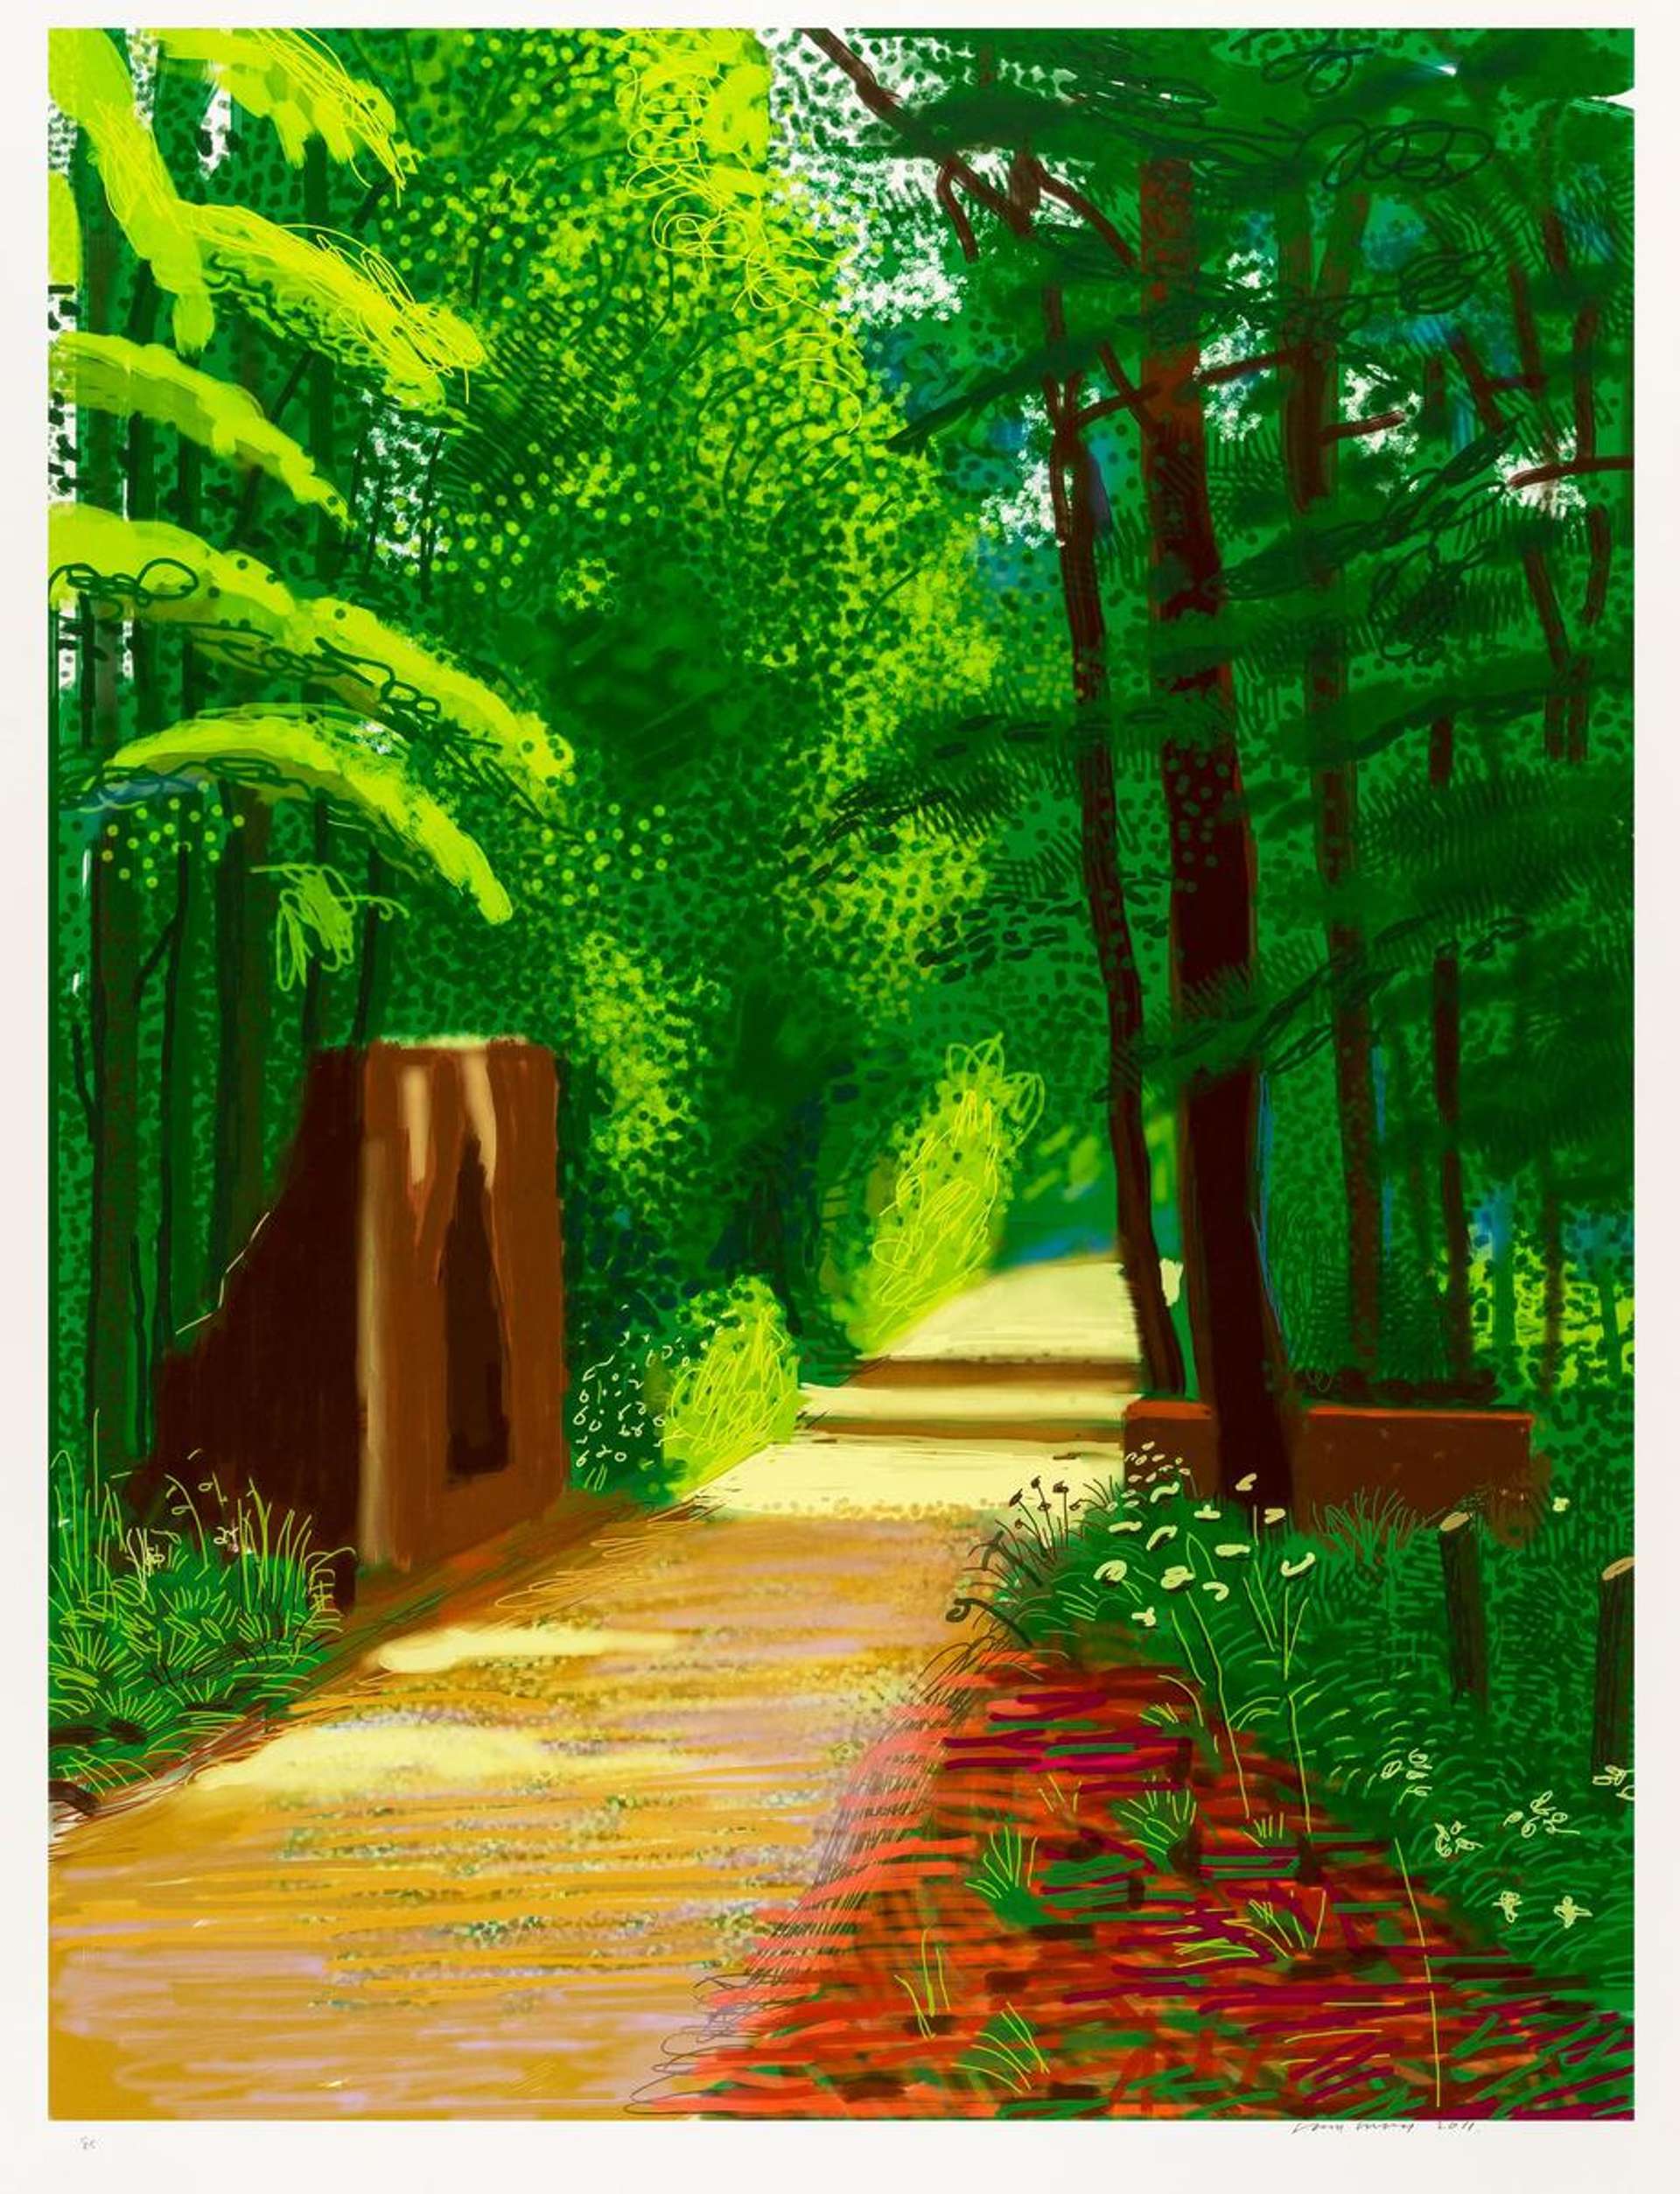 The Arrival Of Spring In Woldgate East Yorkshire 2nd June 2011 by David Hockney